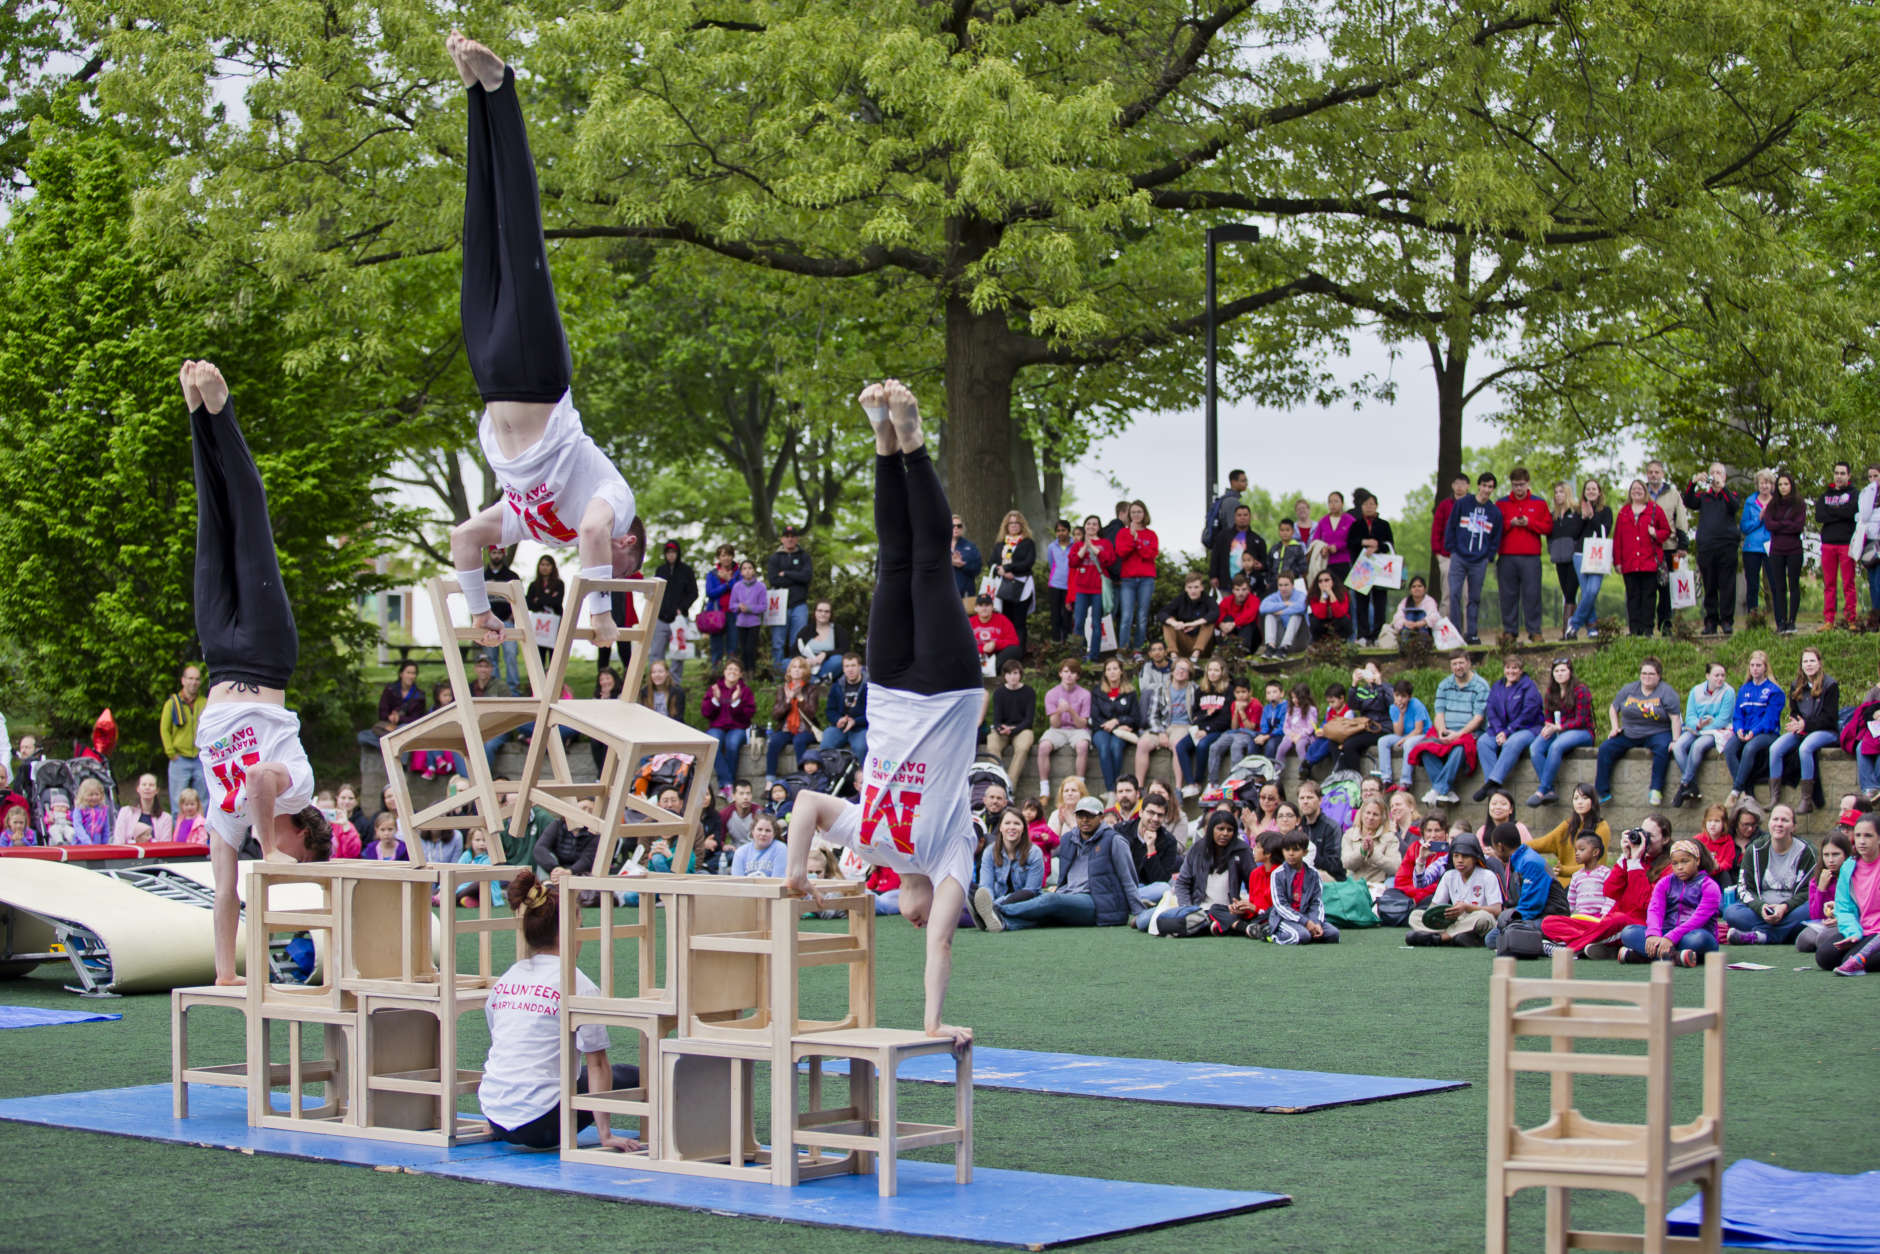 See a high-flying show of gymnastics and acrobatics, compliments of the Gymkana Troupe at Maryland Day on Saturday, April 29, 2017. (Courtesy, John T. Consoli/University of Maryland)